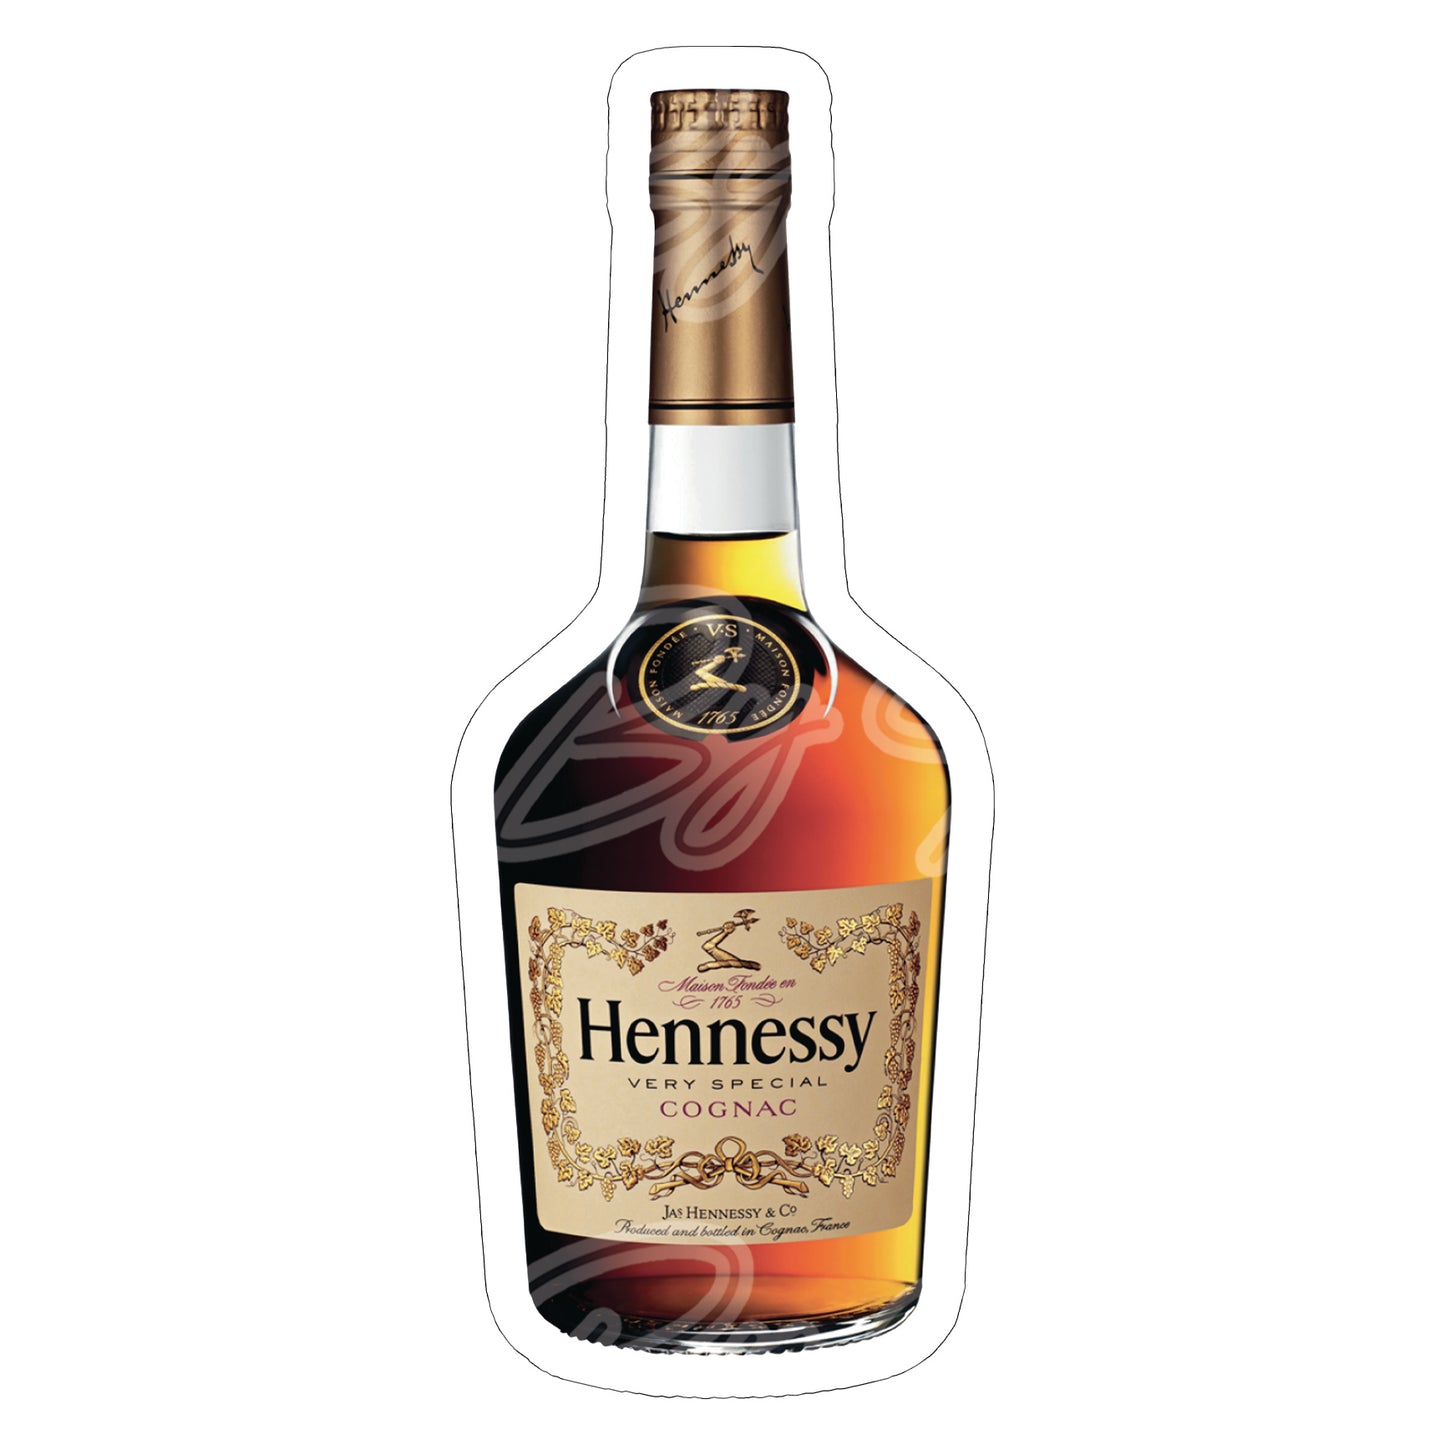  Hennessy  Bottle prop-liquor  prop bottle -photo booth props- props-photo booth props-custom props- custom prop signs-props -Curated by Phoenix 